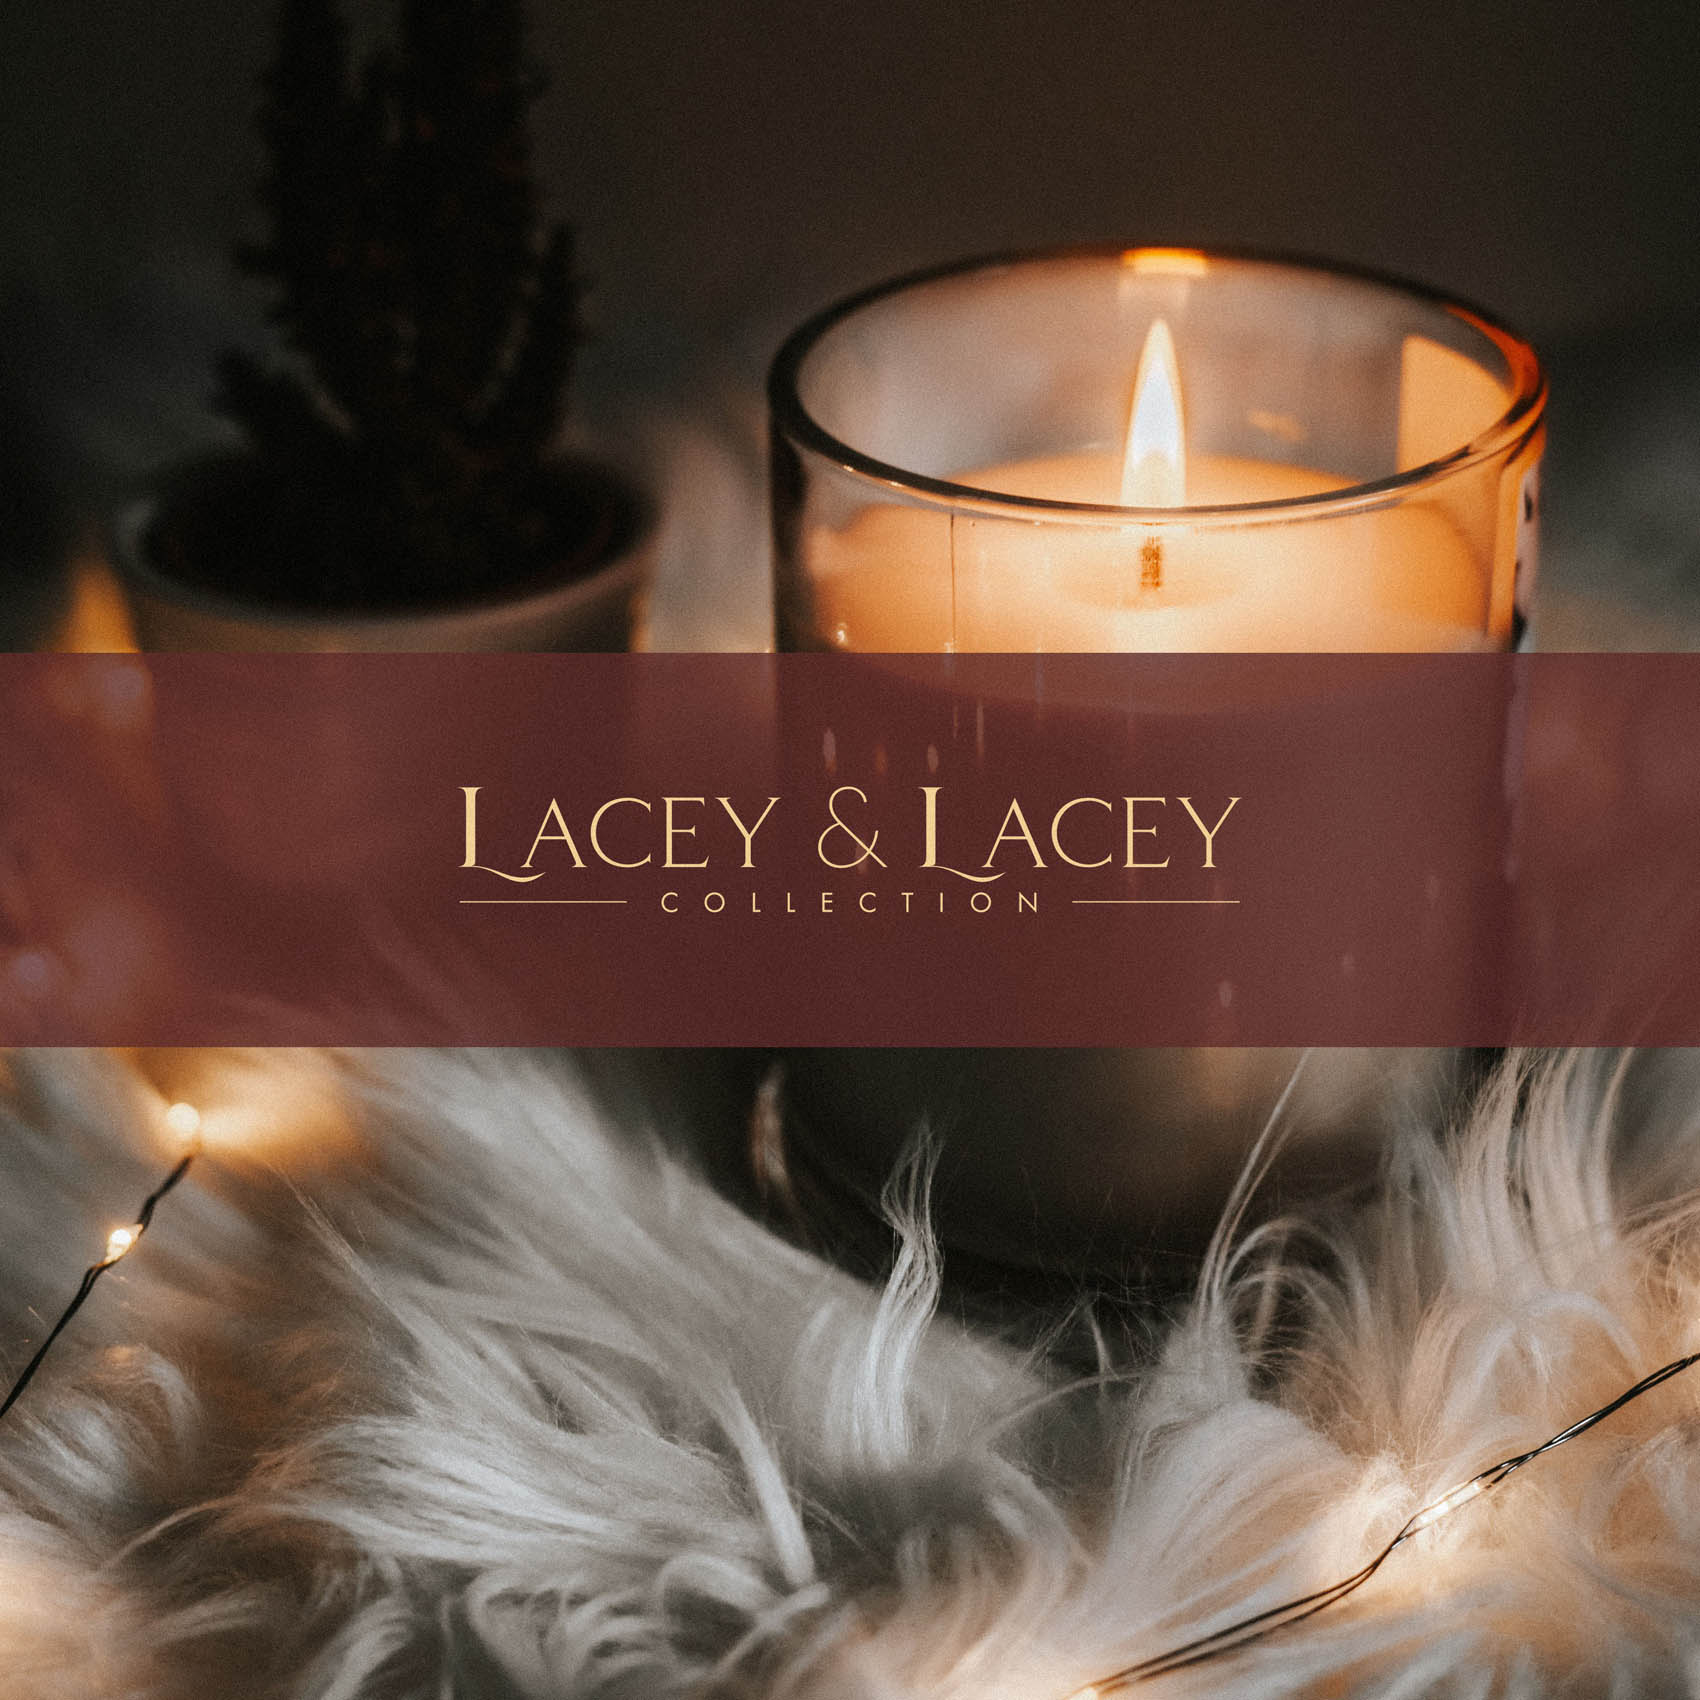 Lacey & Lacey - Luxury Candle Packaging Logo & Brand Identity7